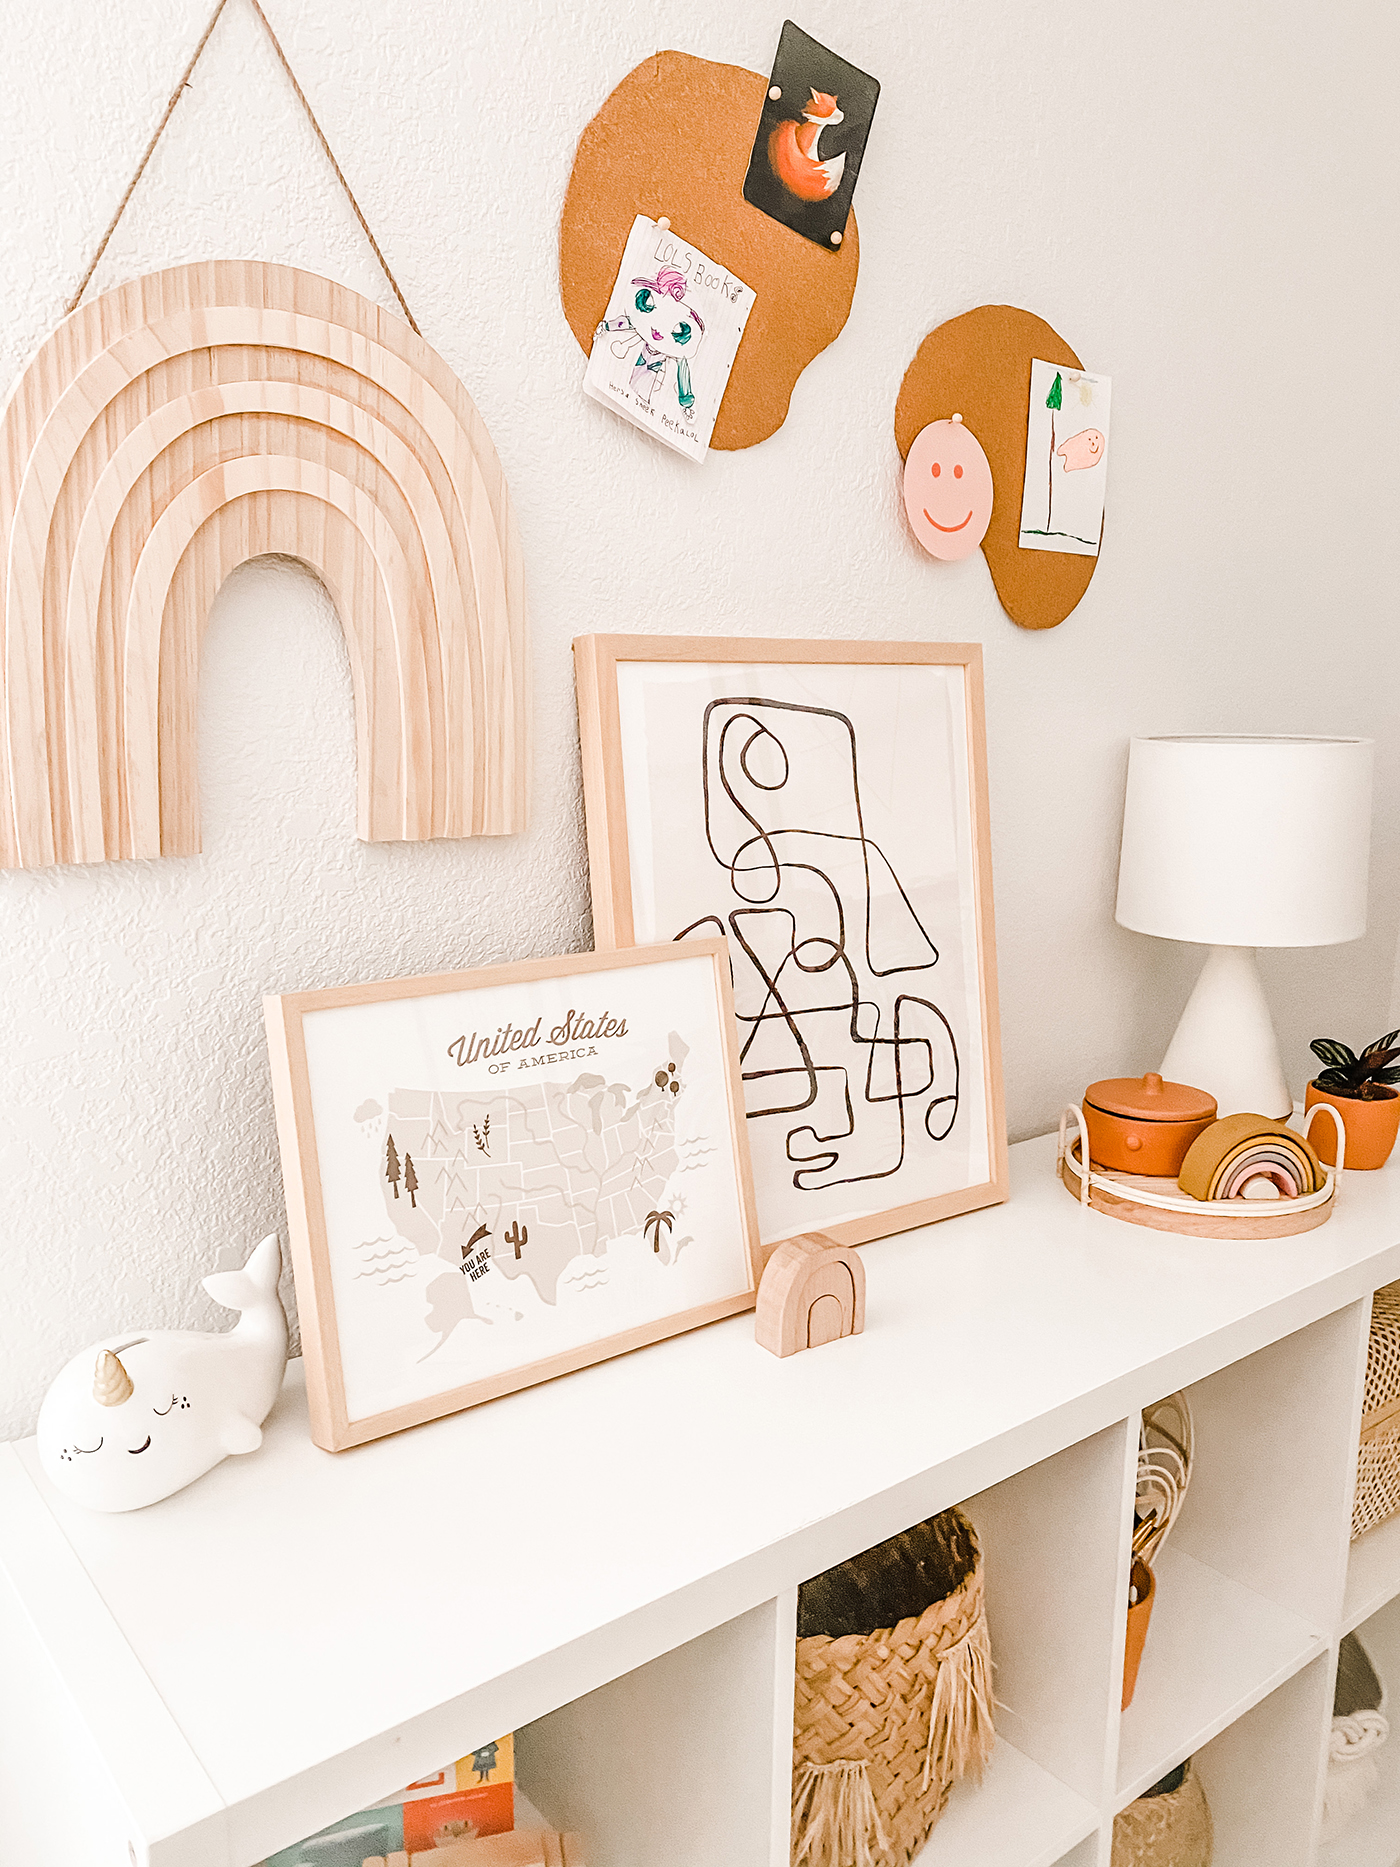 DIY corkboard wall: What you need to know